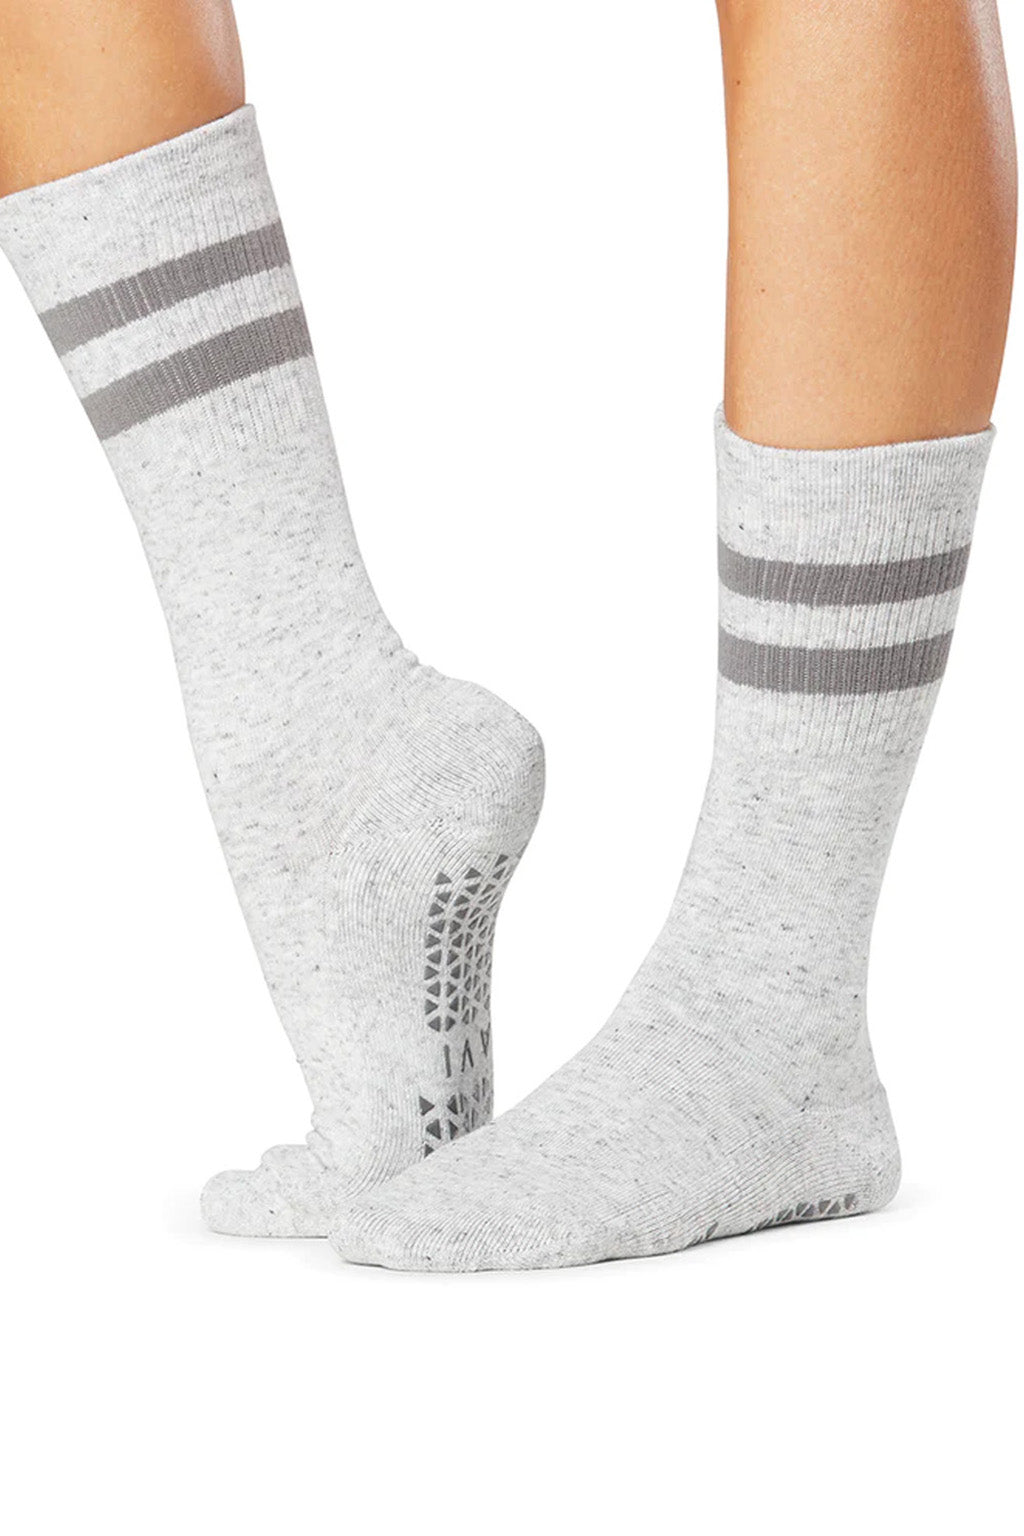 High density grey rubber grip activewear socks for yoga, pilates, gym, and exercise from Tavi Grip featured by sustainable women's activewear brand Jilla Active 